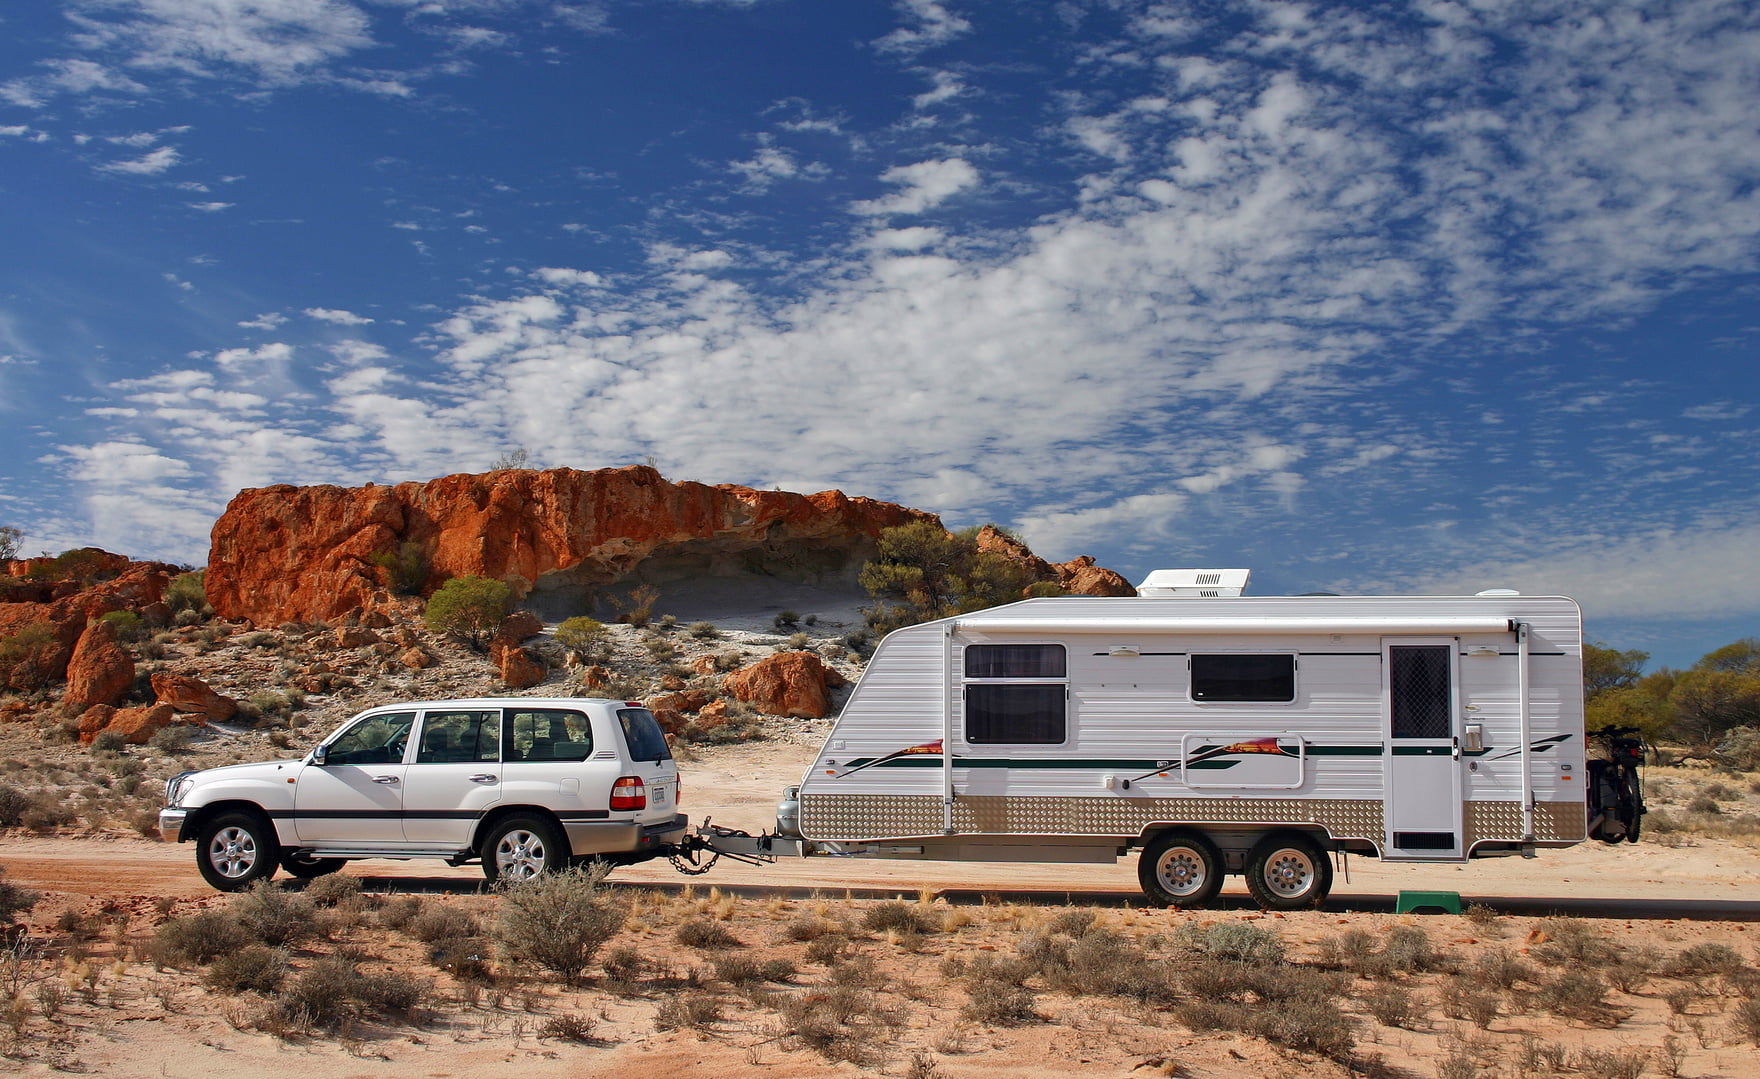 Four wheel drive and offroad caravan in outback Australia against a stunning red rock outcrop with an deep blue sky and interesting cloud formations